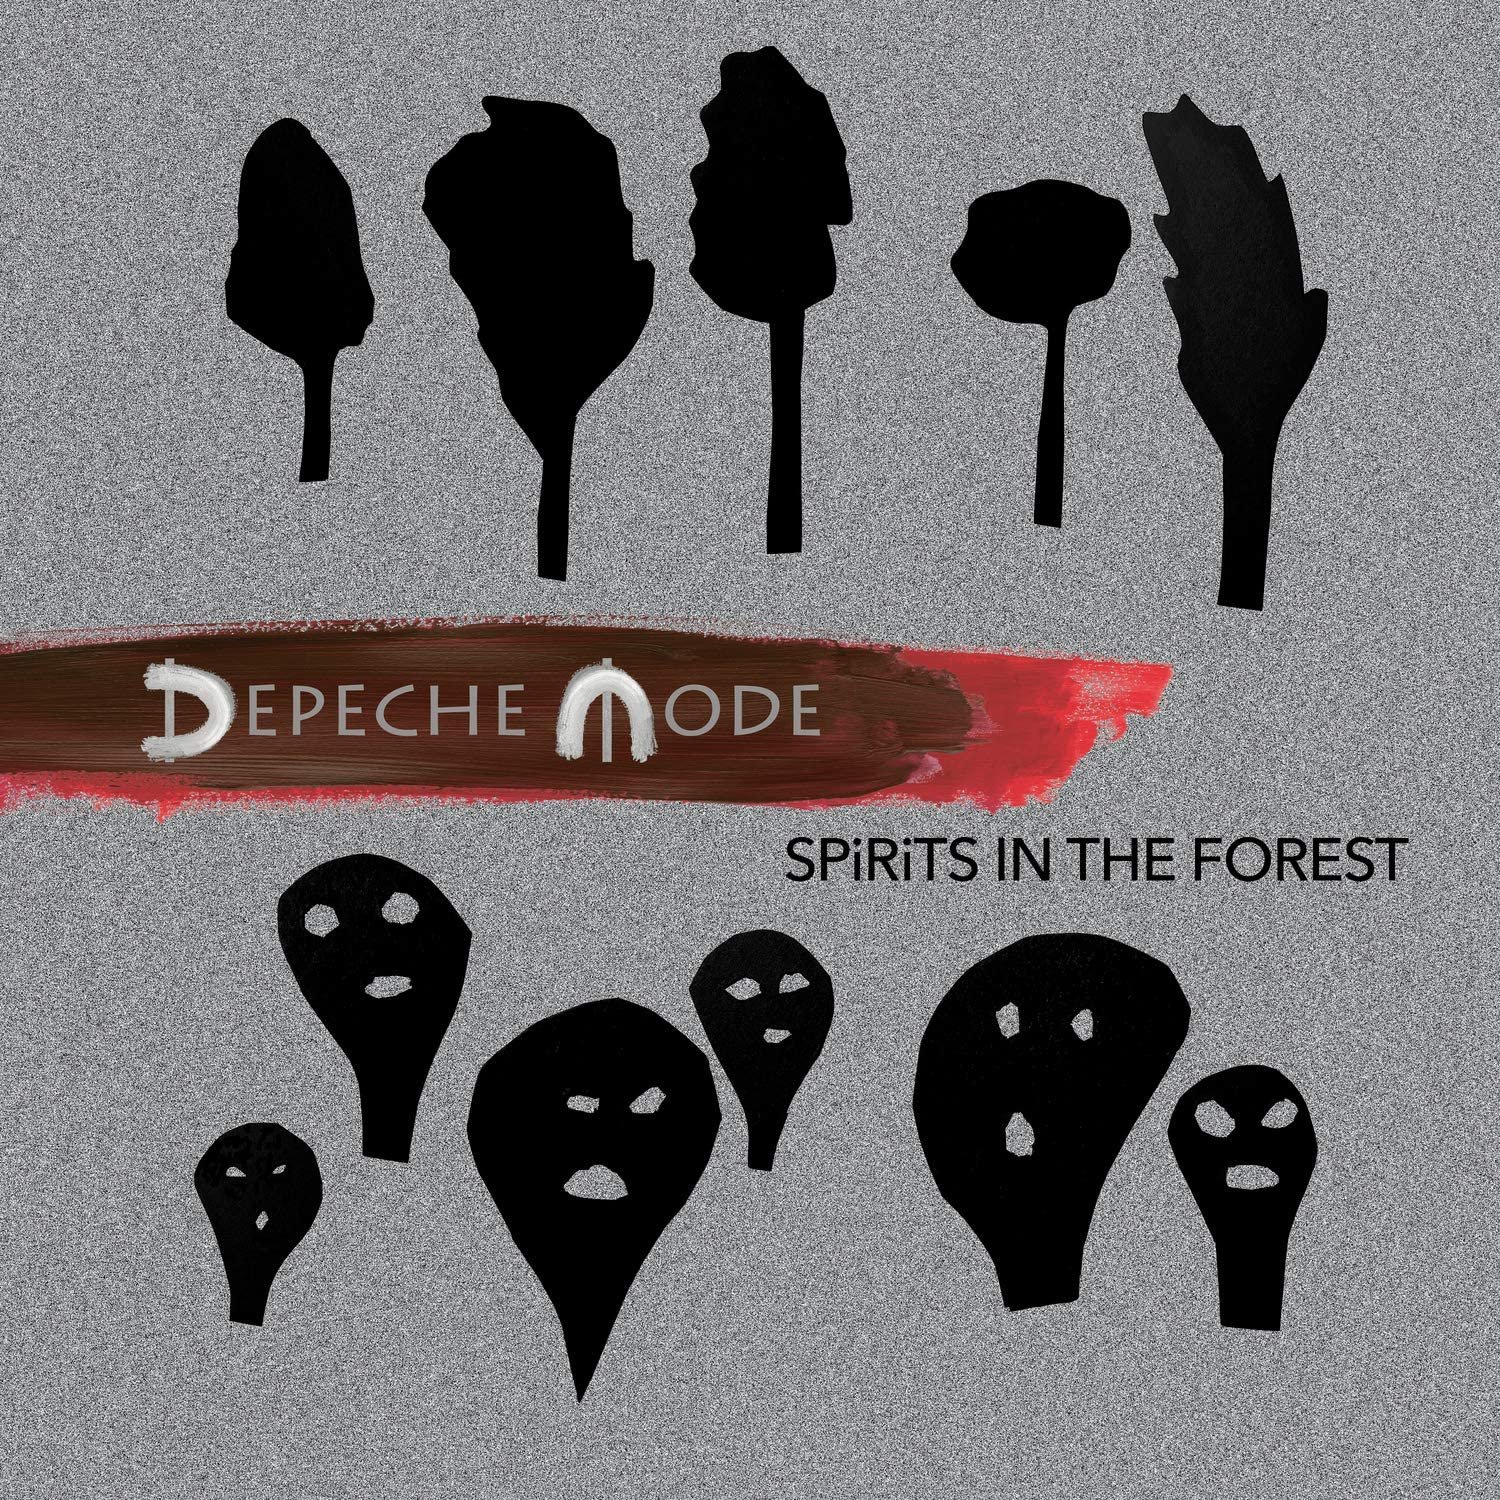 Depeche Mode-Spirits In The Forest-2CD-FLAC-2020-BOCKSCAR Download